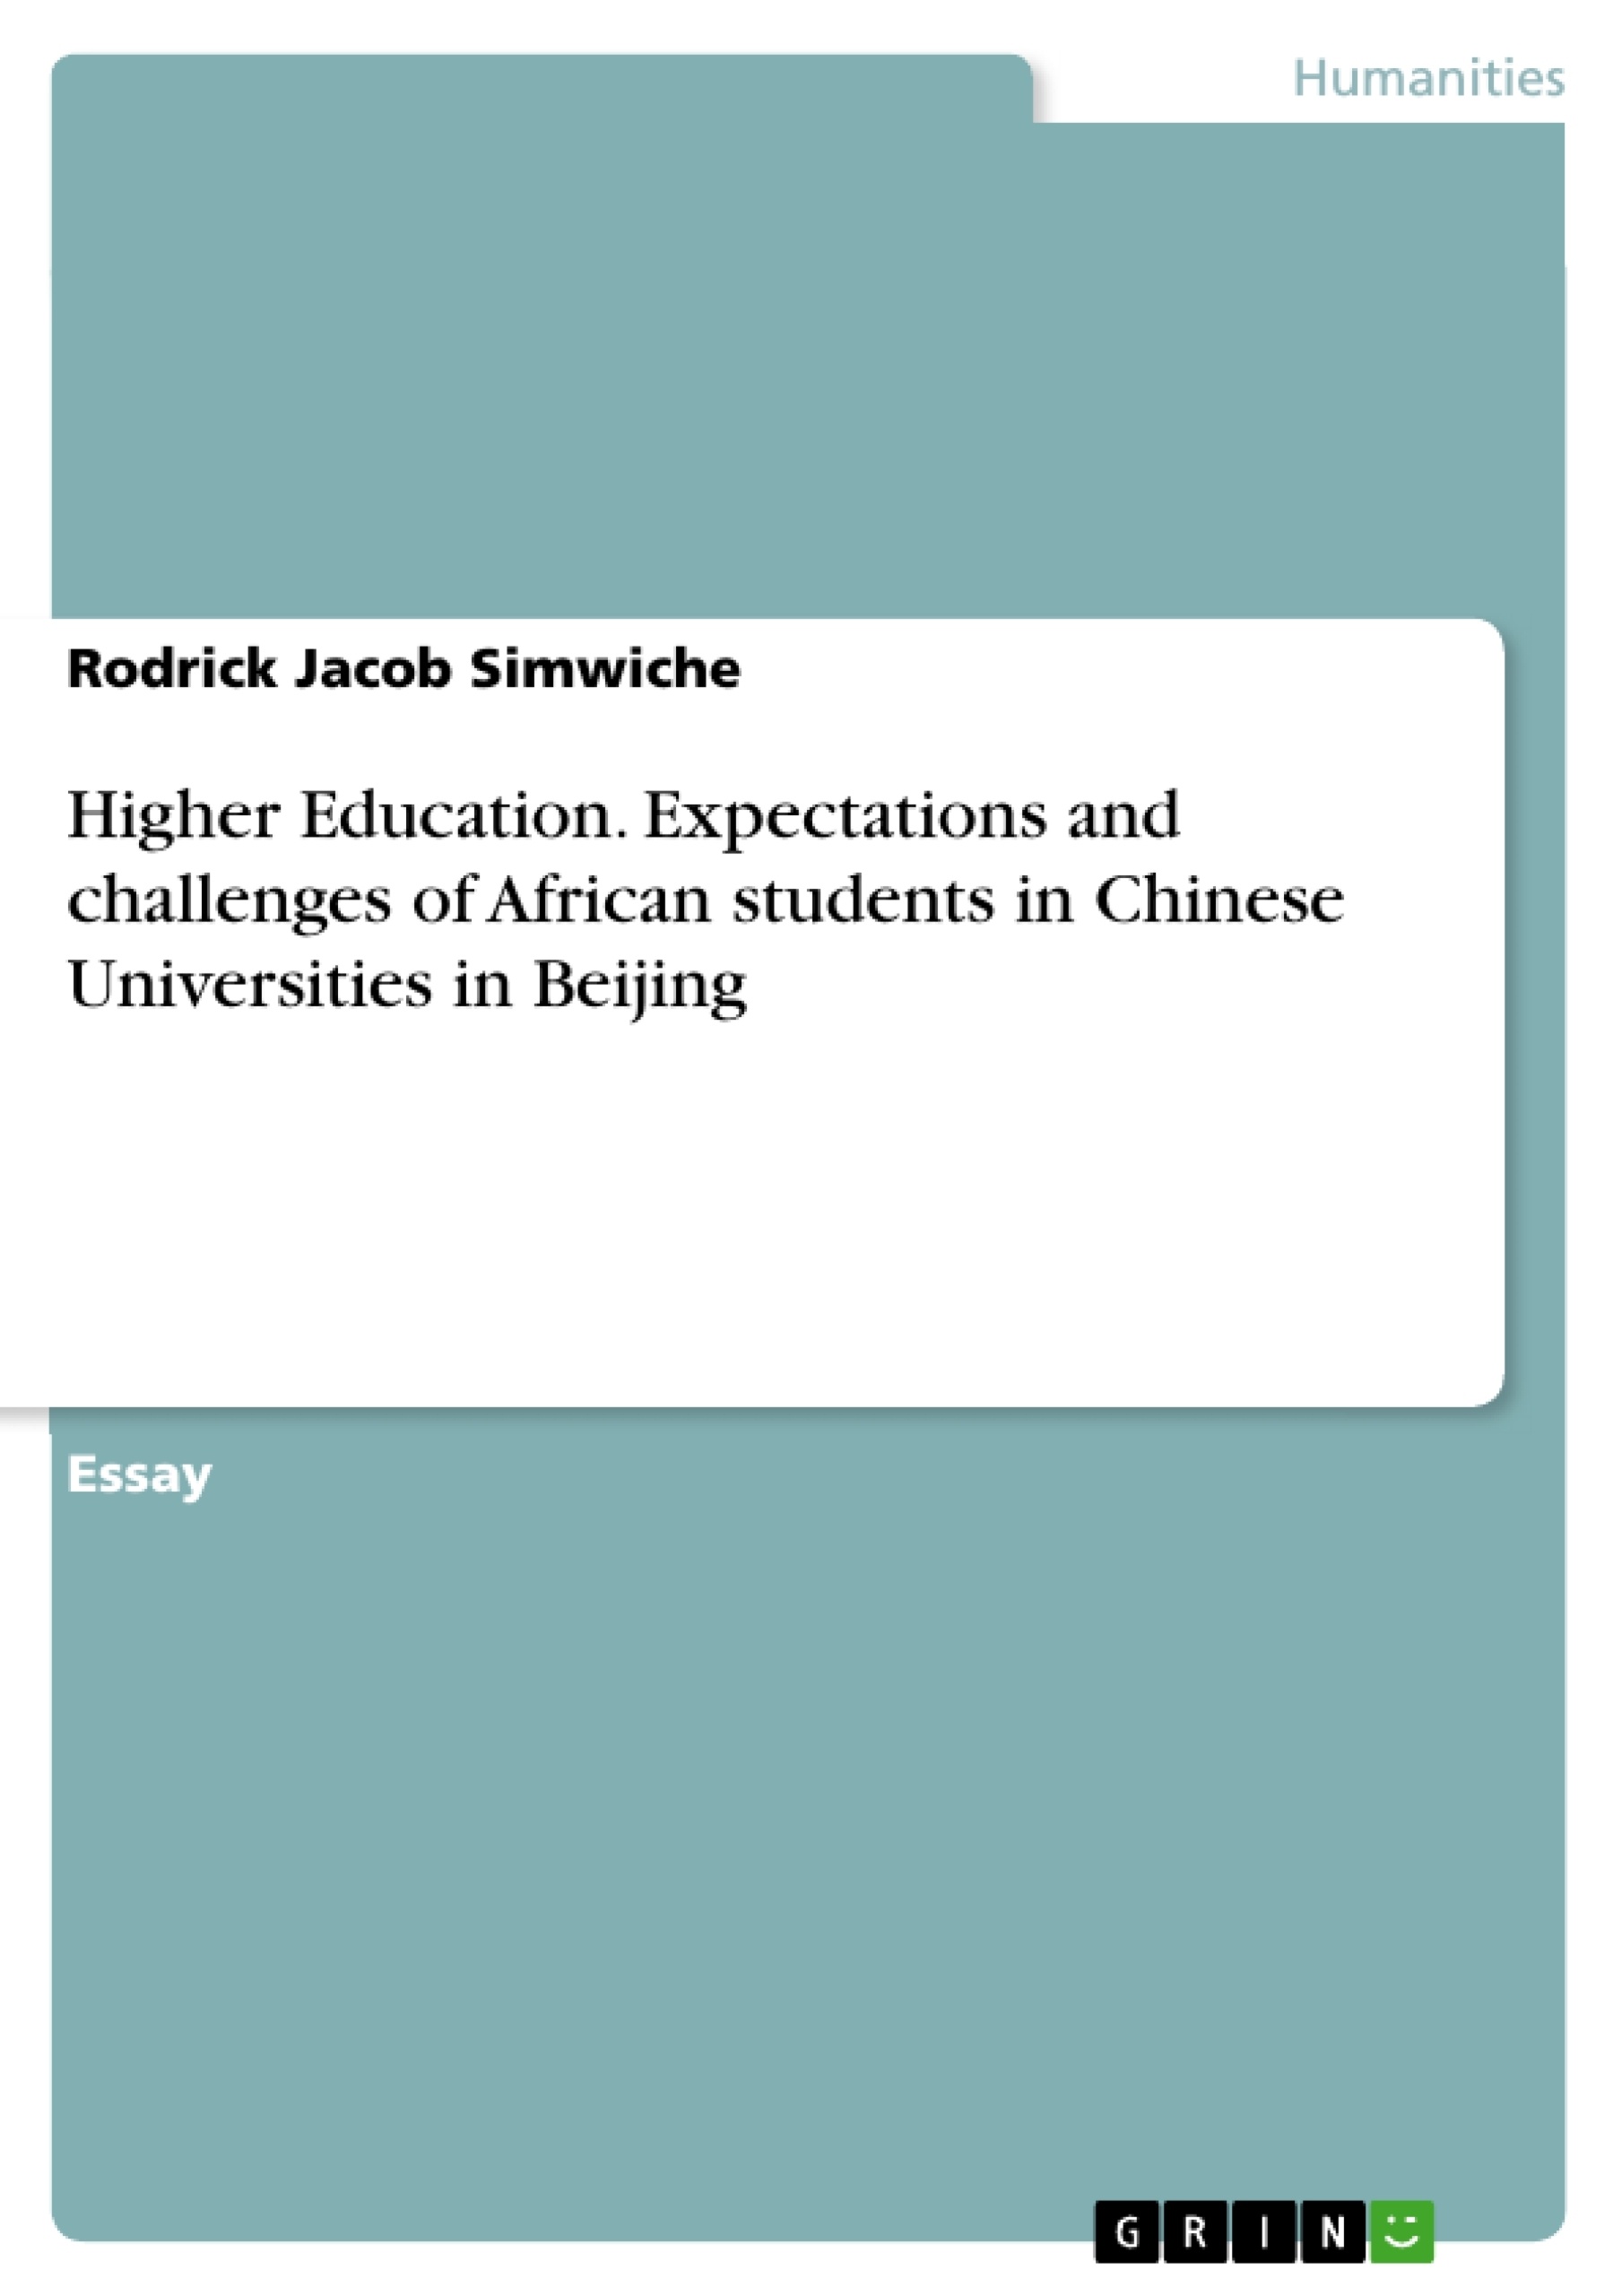 Titre: Higher Education. Expectations and challenges of African students in Chinese Universities in Beijing